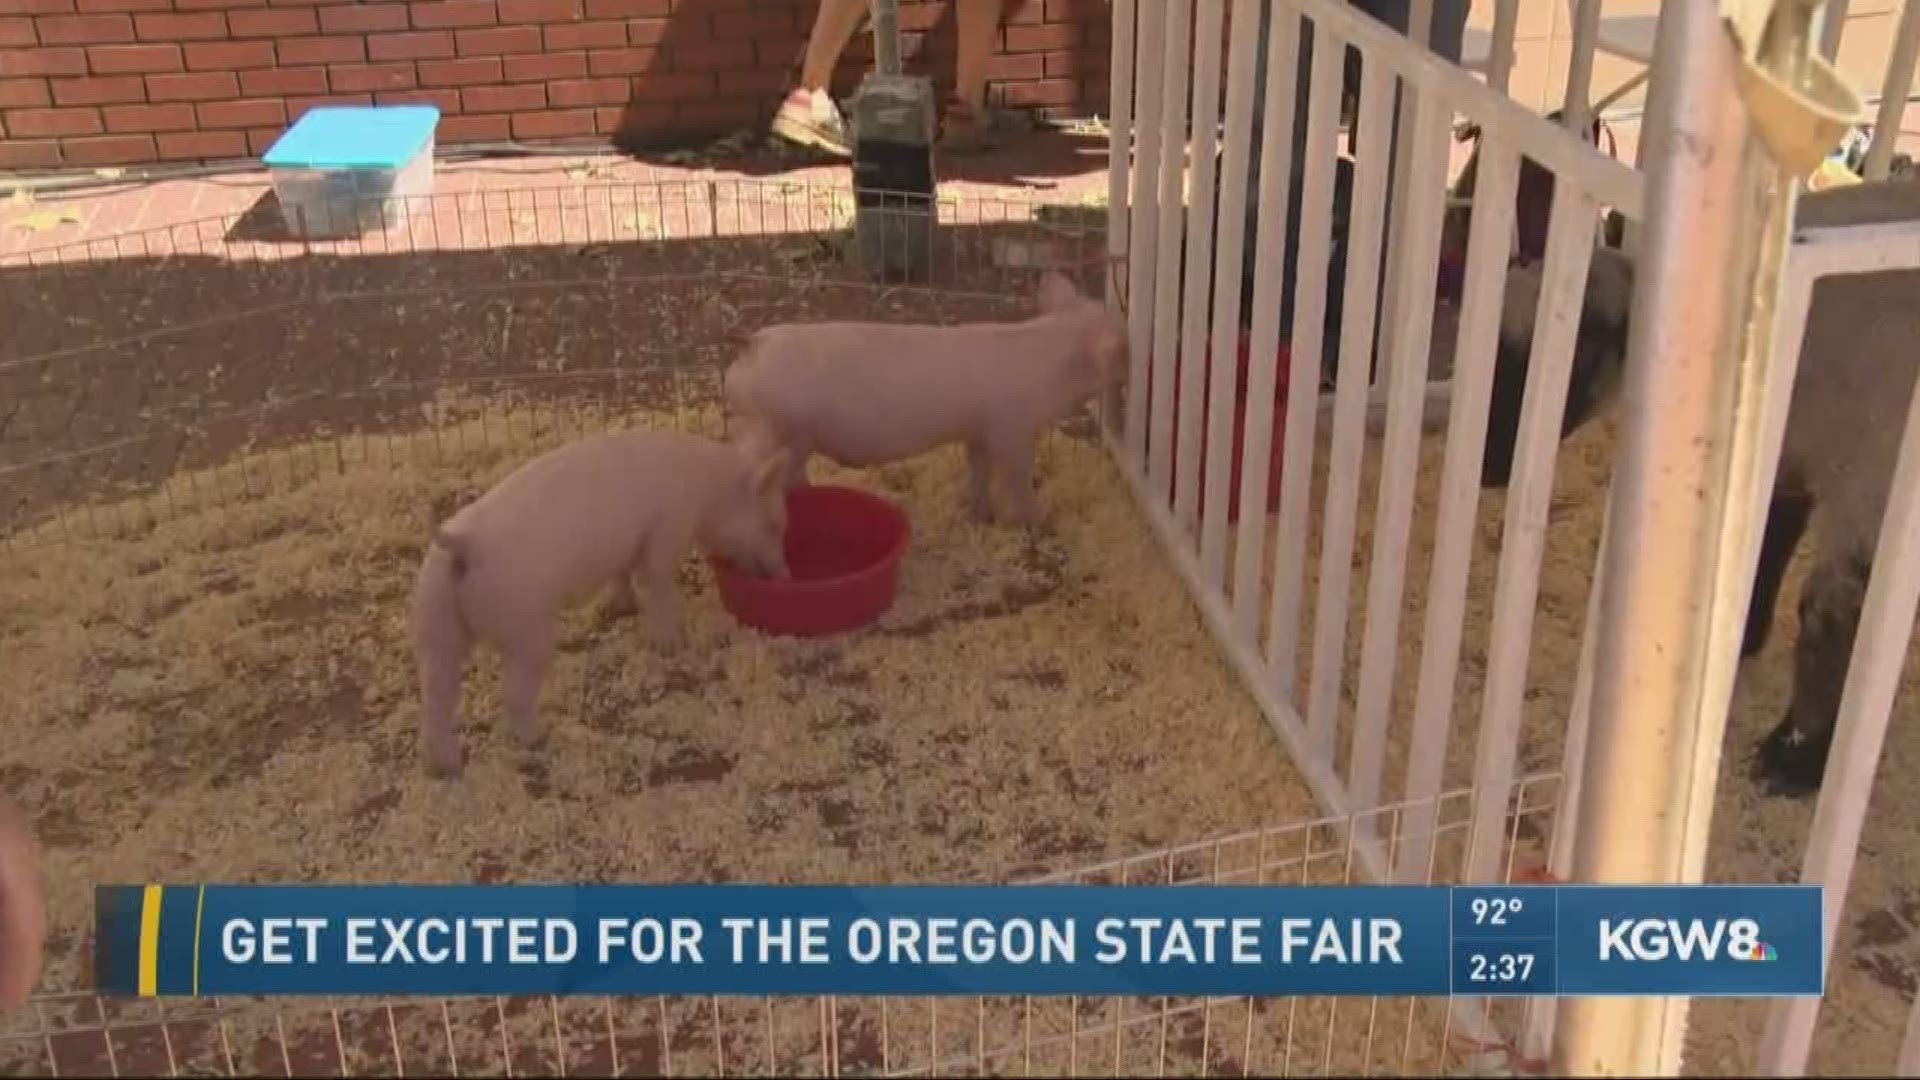 Get excited for the Oregon State Fair